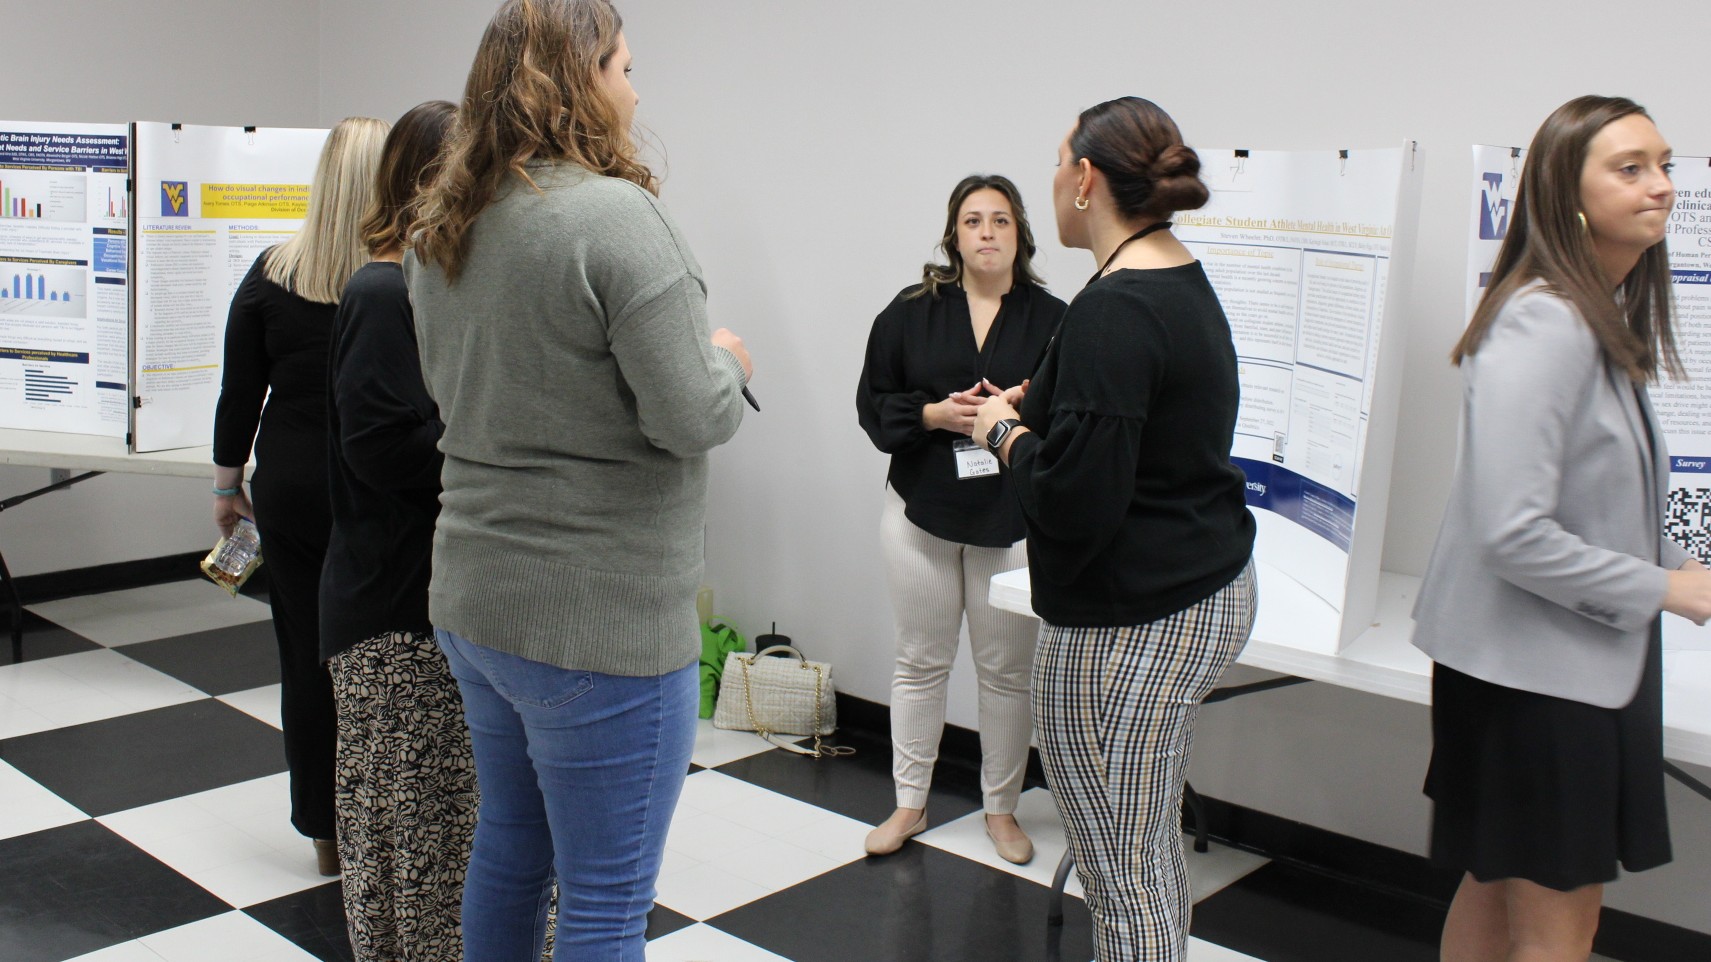 OTS gathered around a research poster in discussions